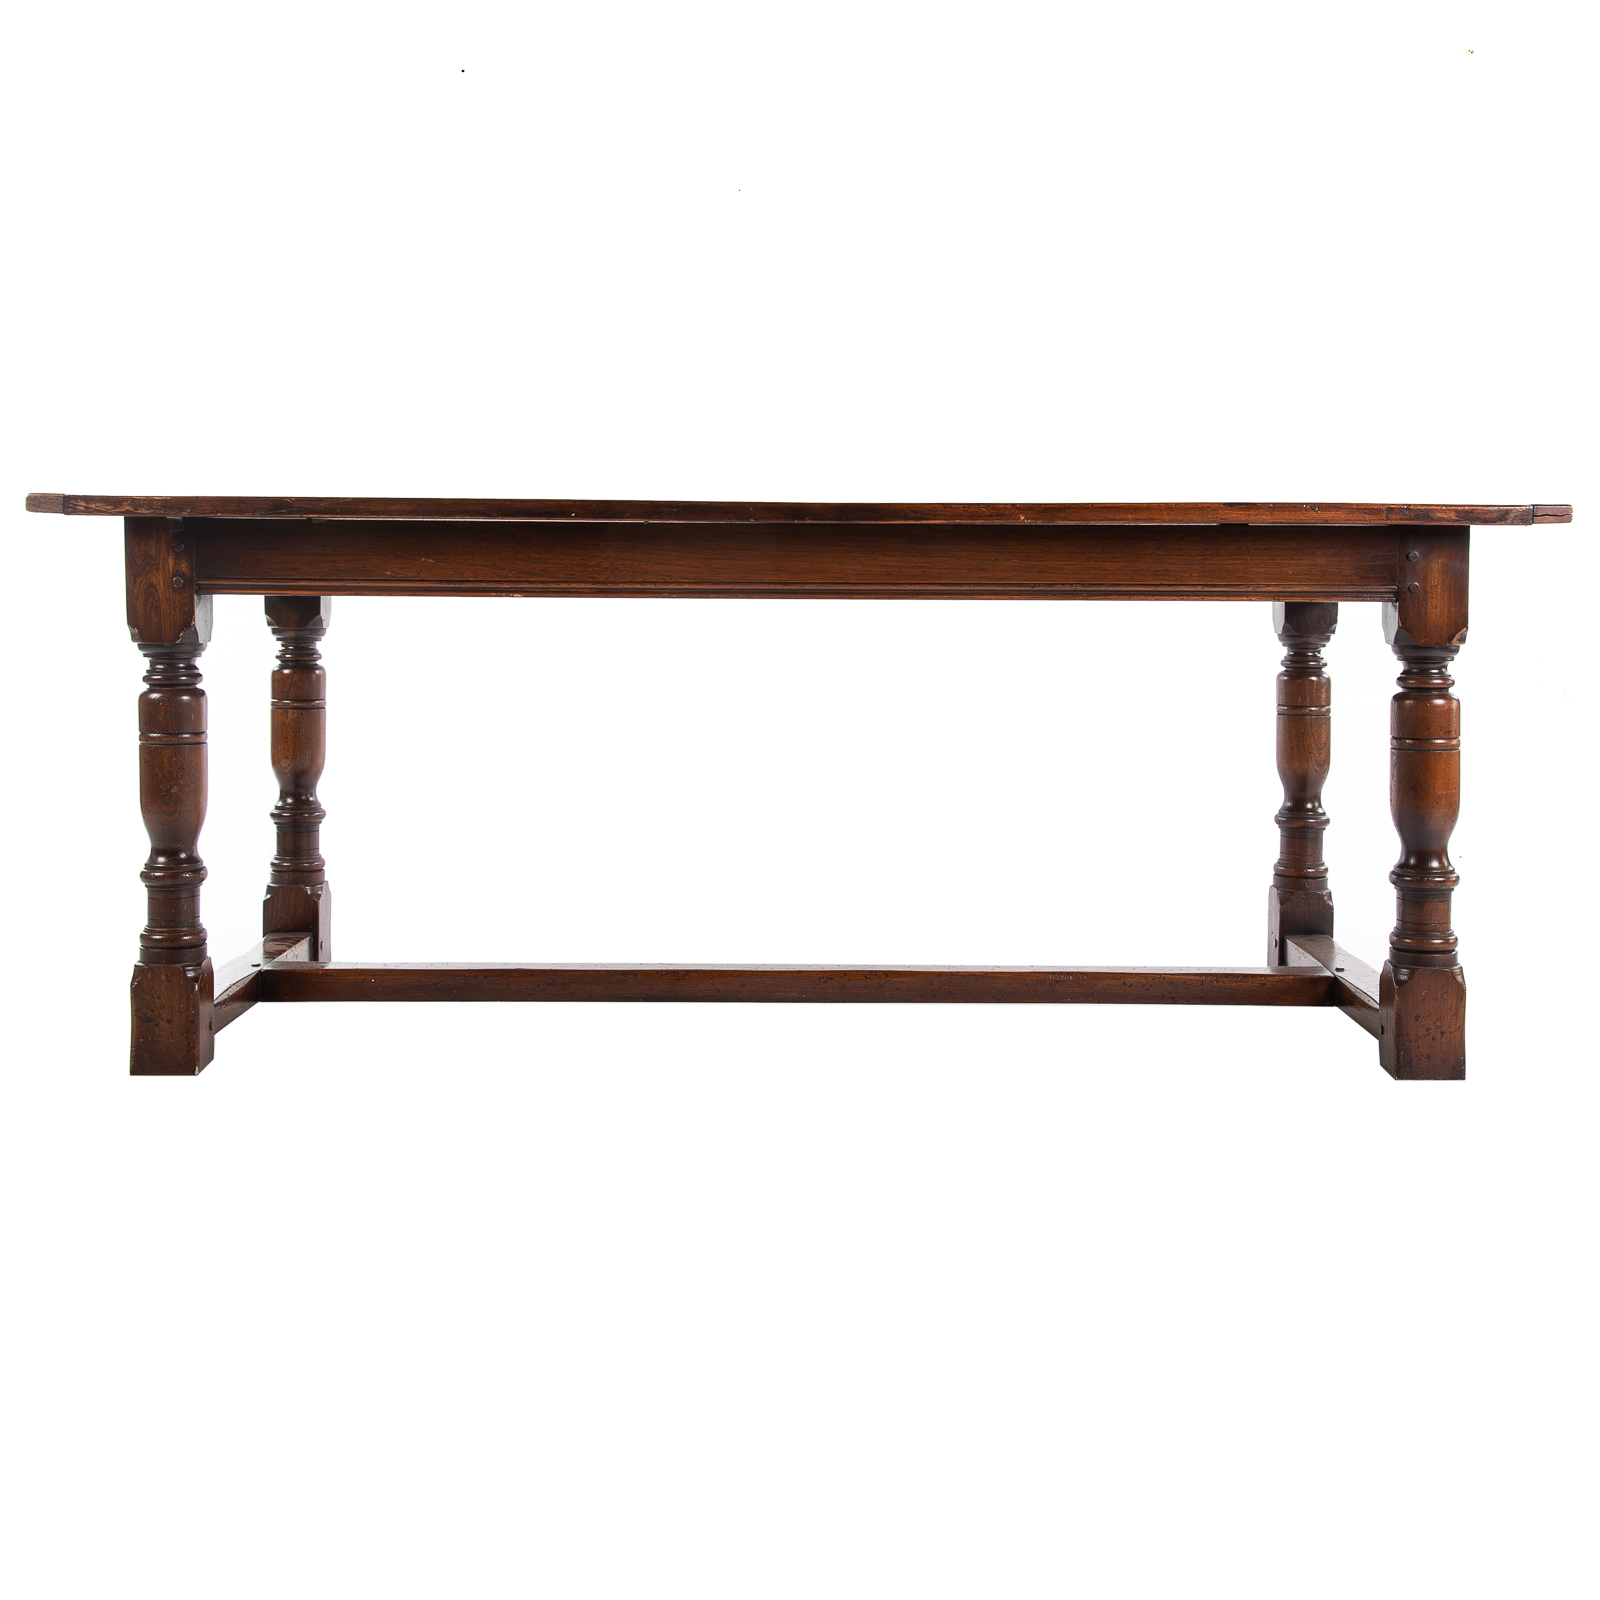 CONTINENTAL OAK REFECTORY TABLE